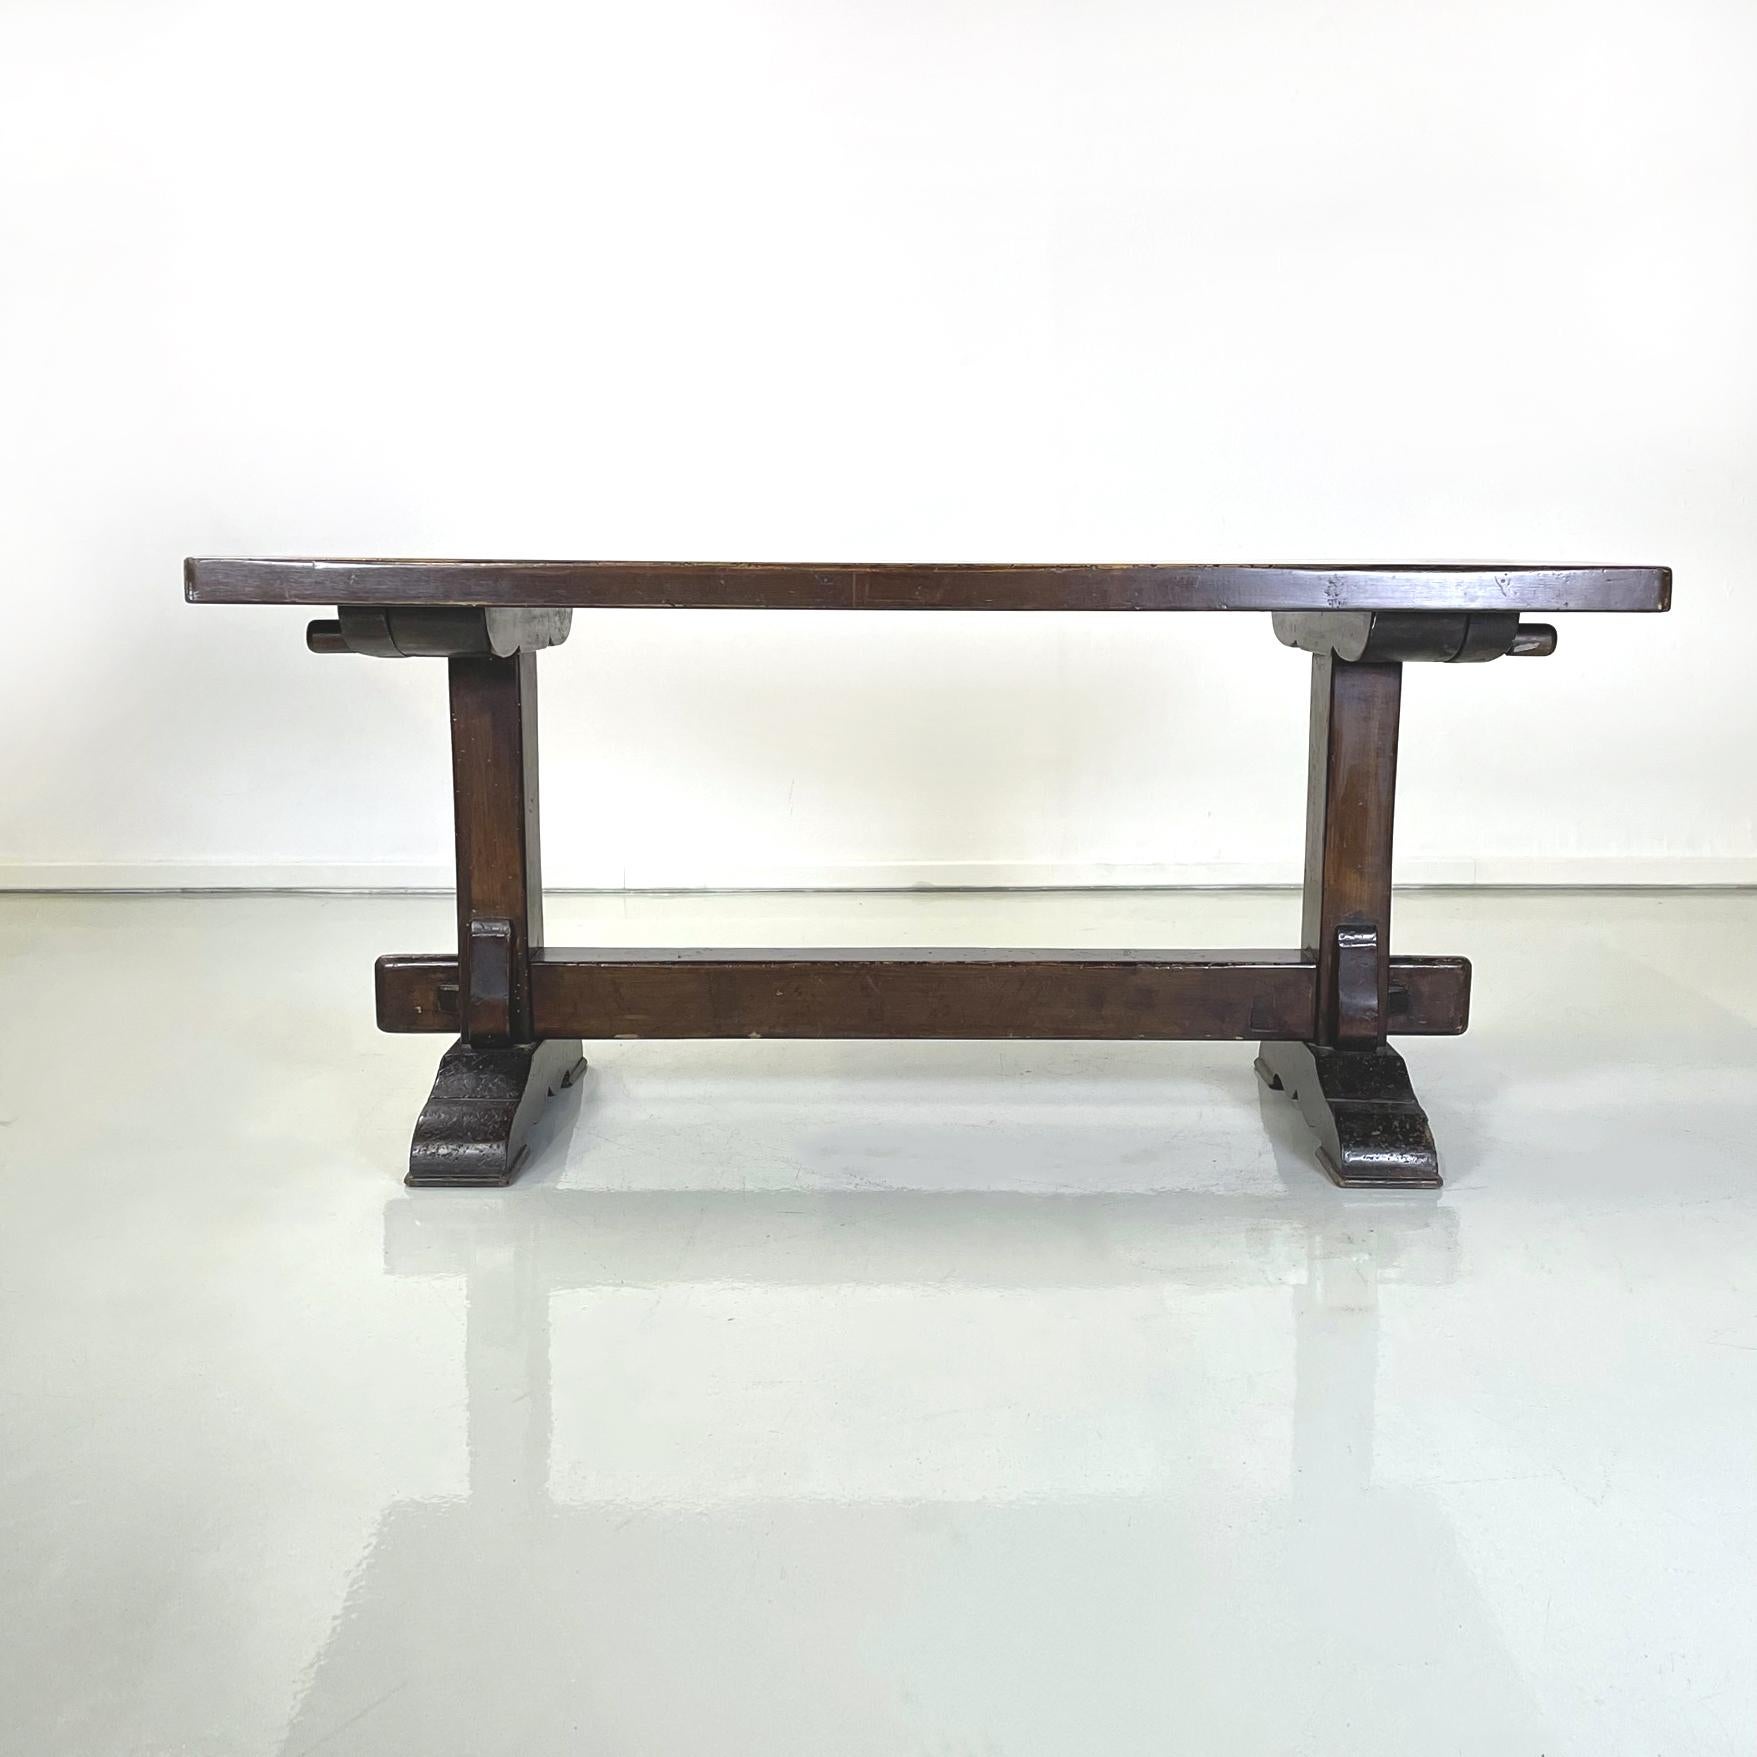 Italian antique Wooden rectangular dining table, early 1900s
Dining table with rectangular wooden top. The top is supported by two legs, joined in the middle by a crossbeam. In eighteenth-century style.
Early 1900s
Very good conditions, in